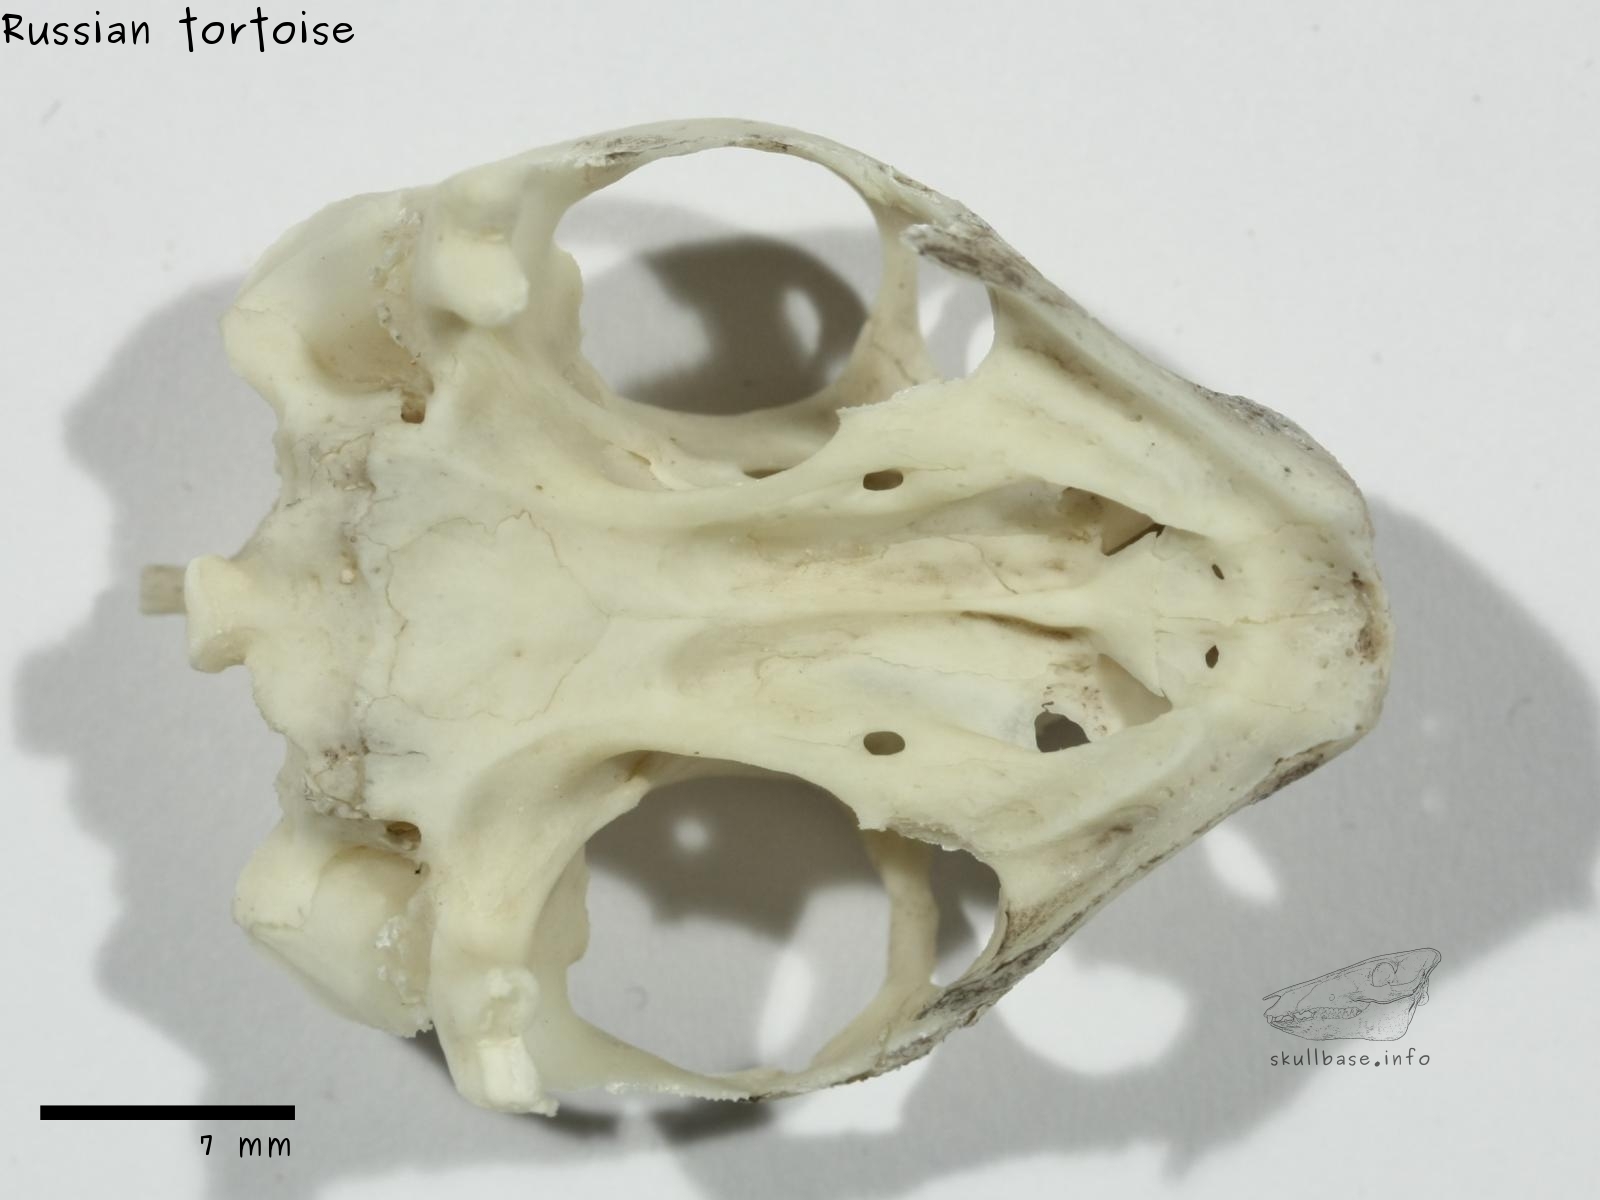 Russian tortoise (Agrionemys horsfieldii) skull ventral view